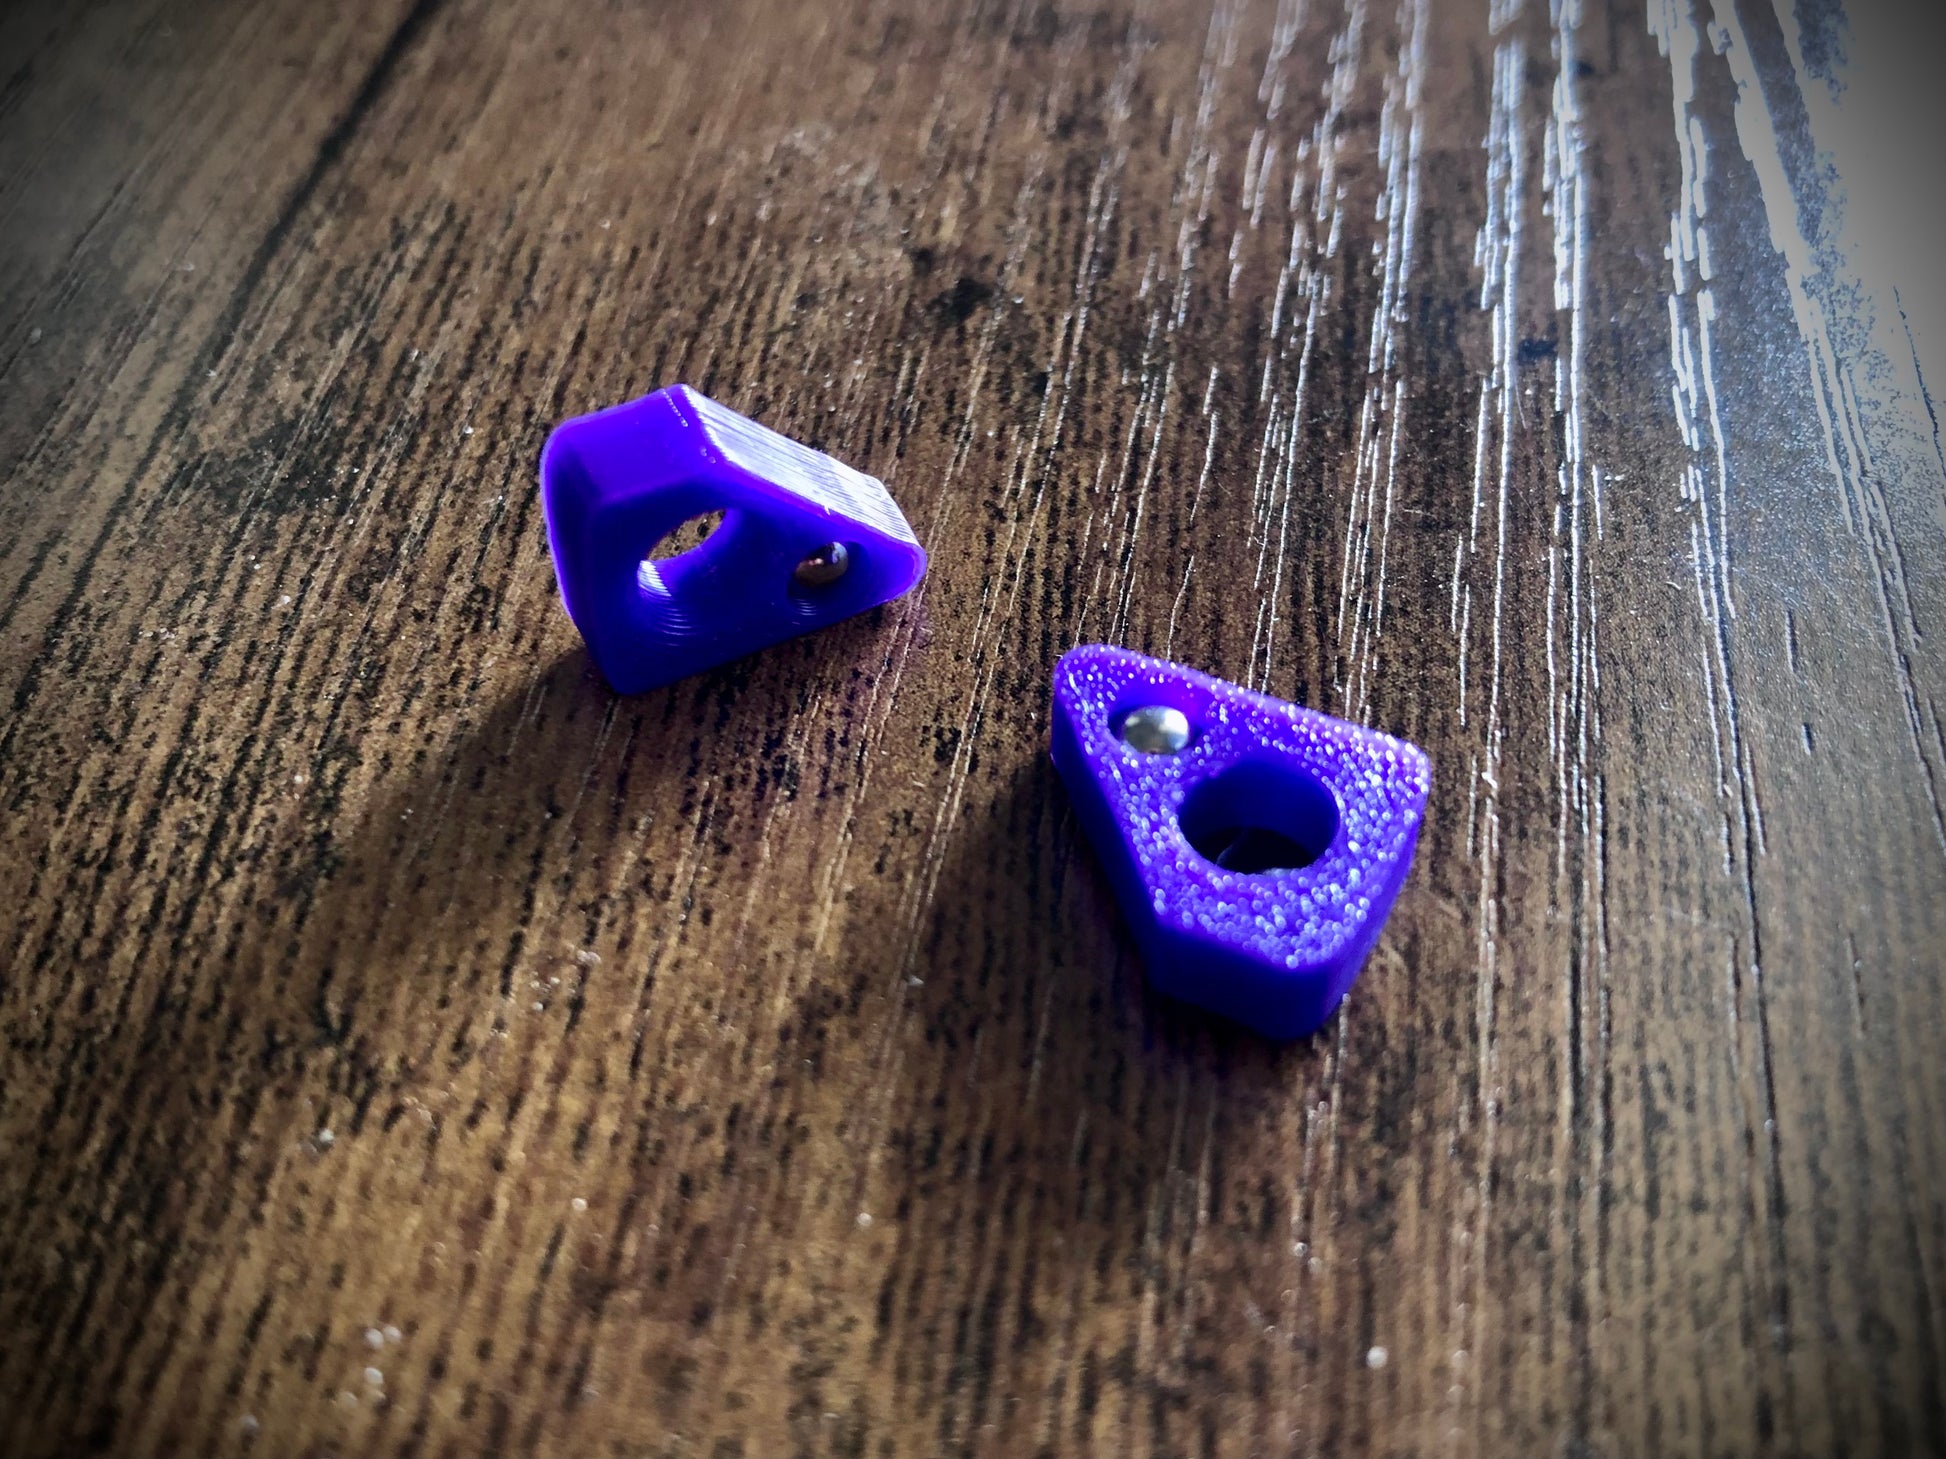 2x Polyurethane weights for the MachineWise Serif and Opus balisongs. Each weight includes 1x removable tungsten ball.